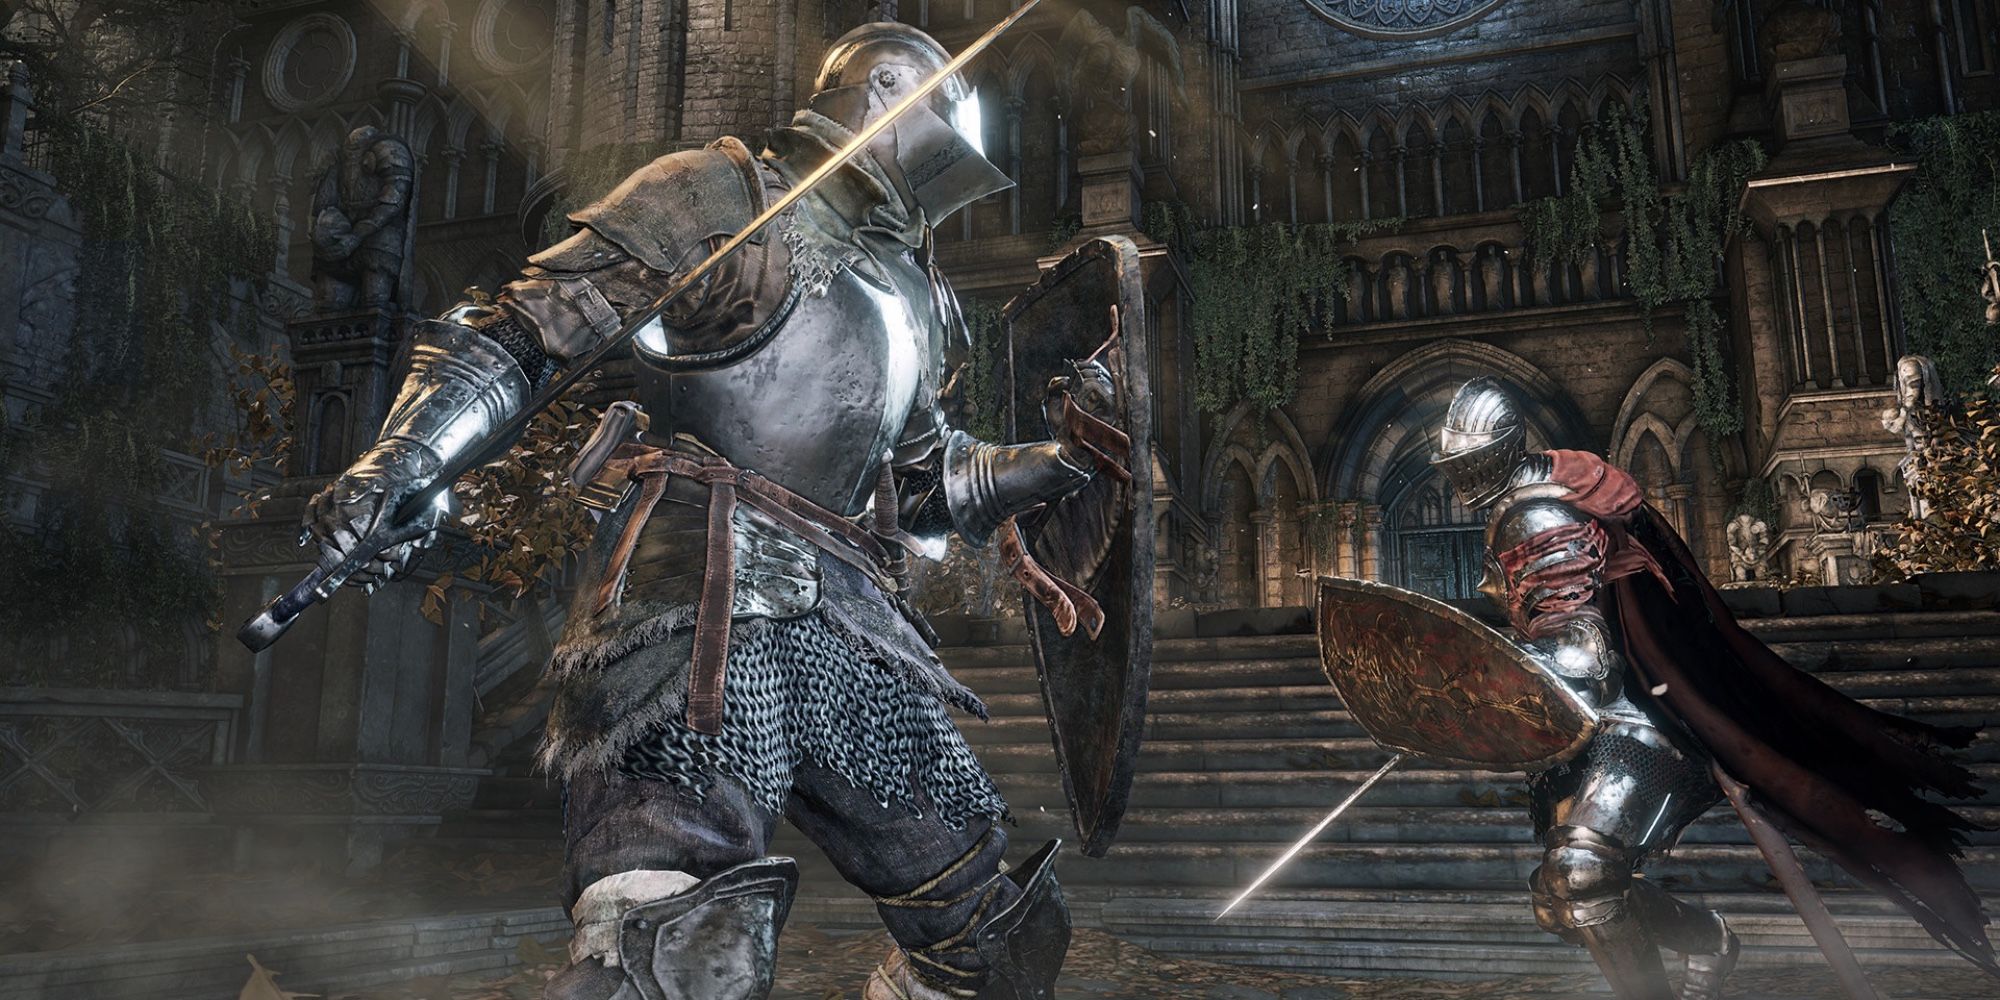 Popular Games on Steam - Dark Souls III - Player fights enemy with sword and shield